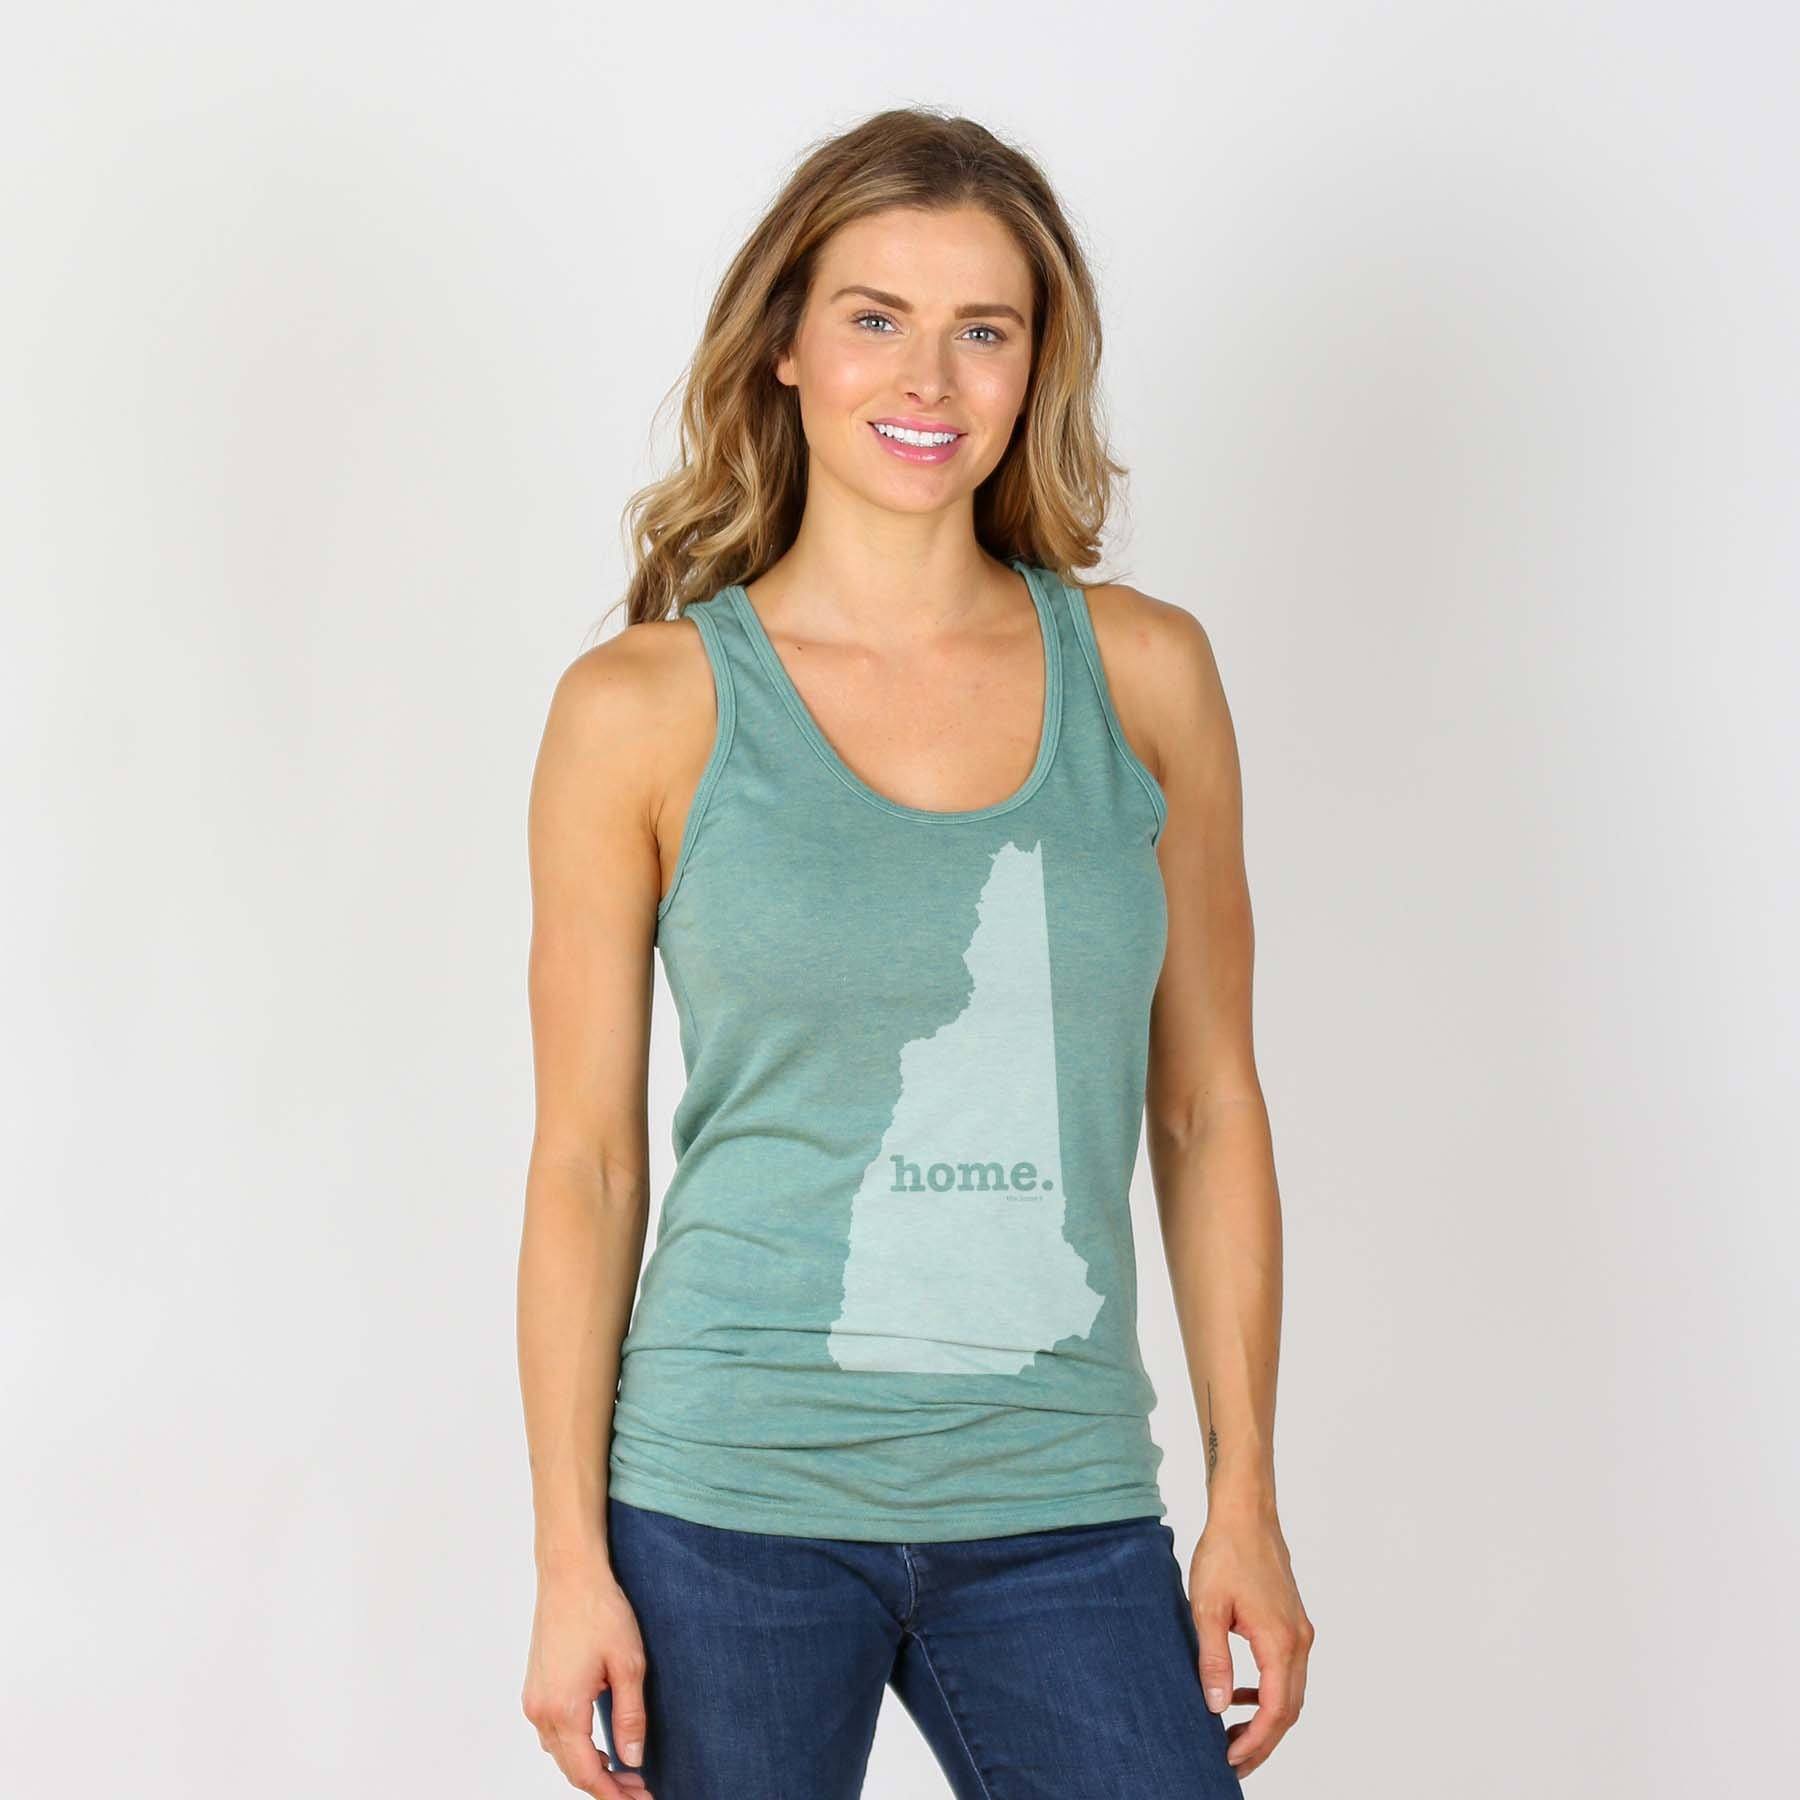 New Hampshire Home Tank Top Tank Top The Home T